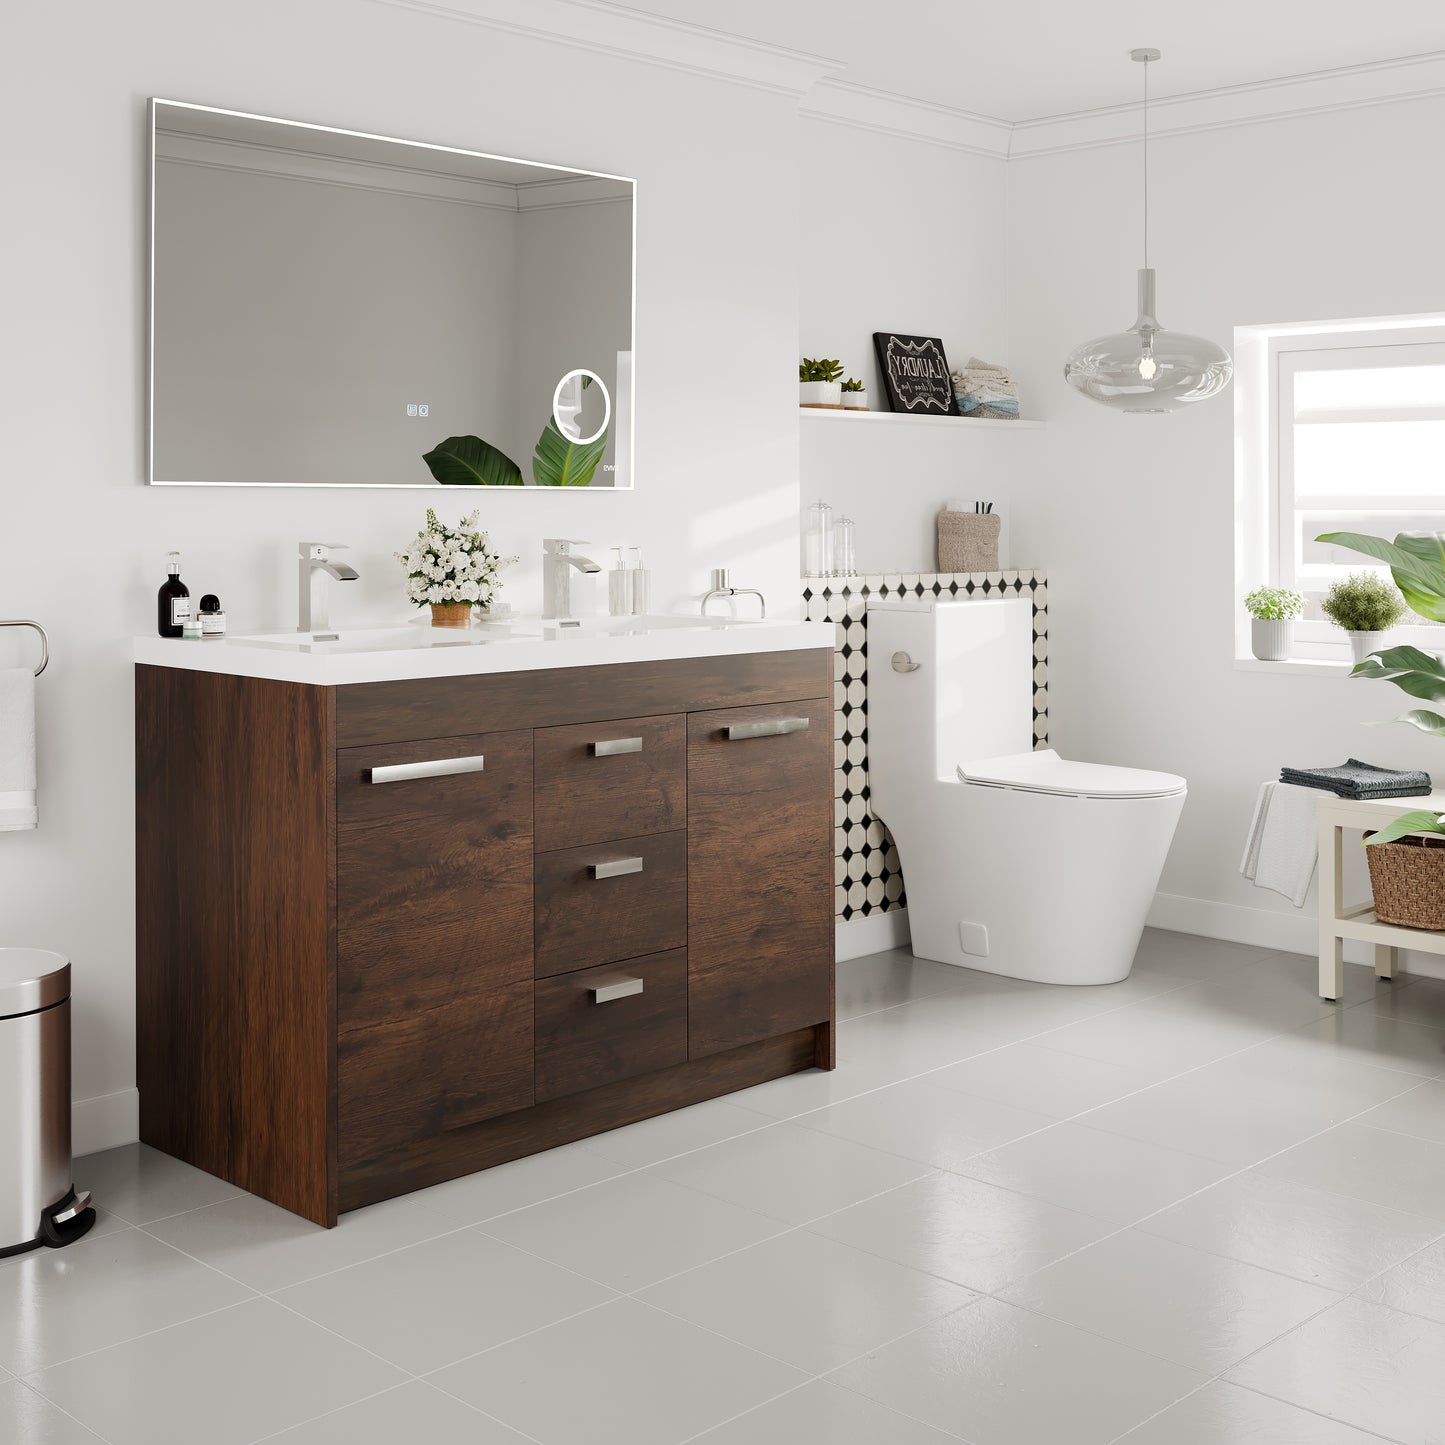 Lugano 48"W x 20"D Rosewood Double Sink Bathroom Vanity with Acrylic Countertop and Integrated Sink